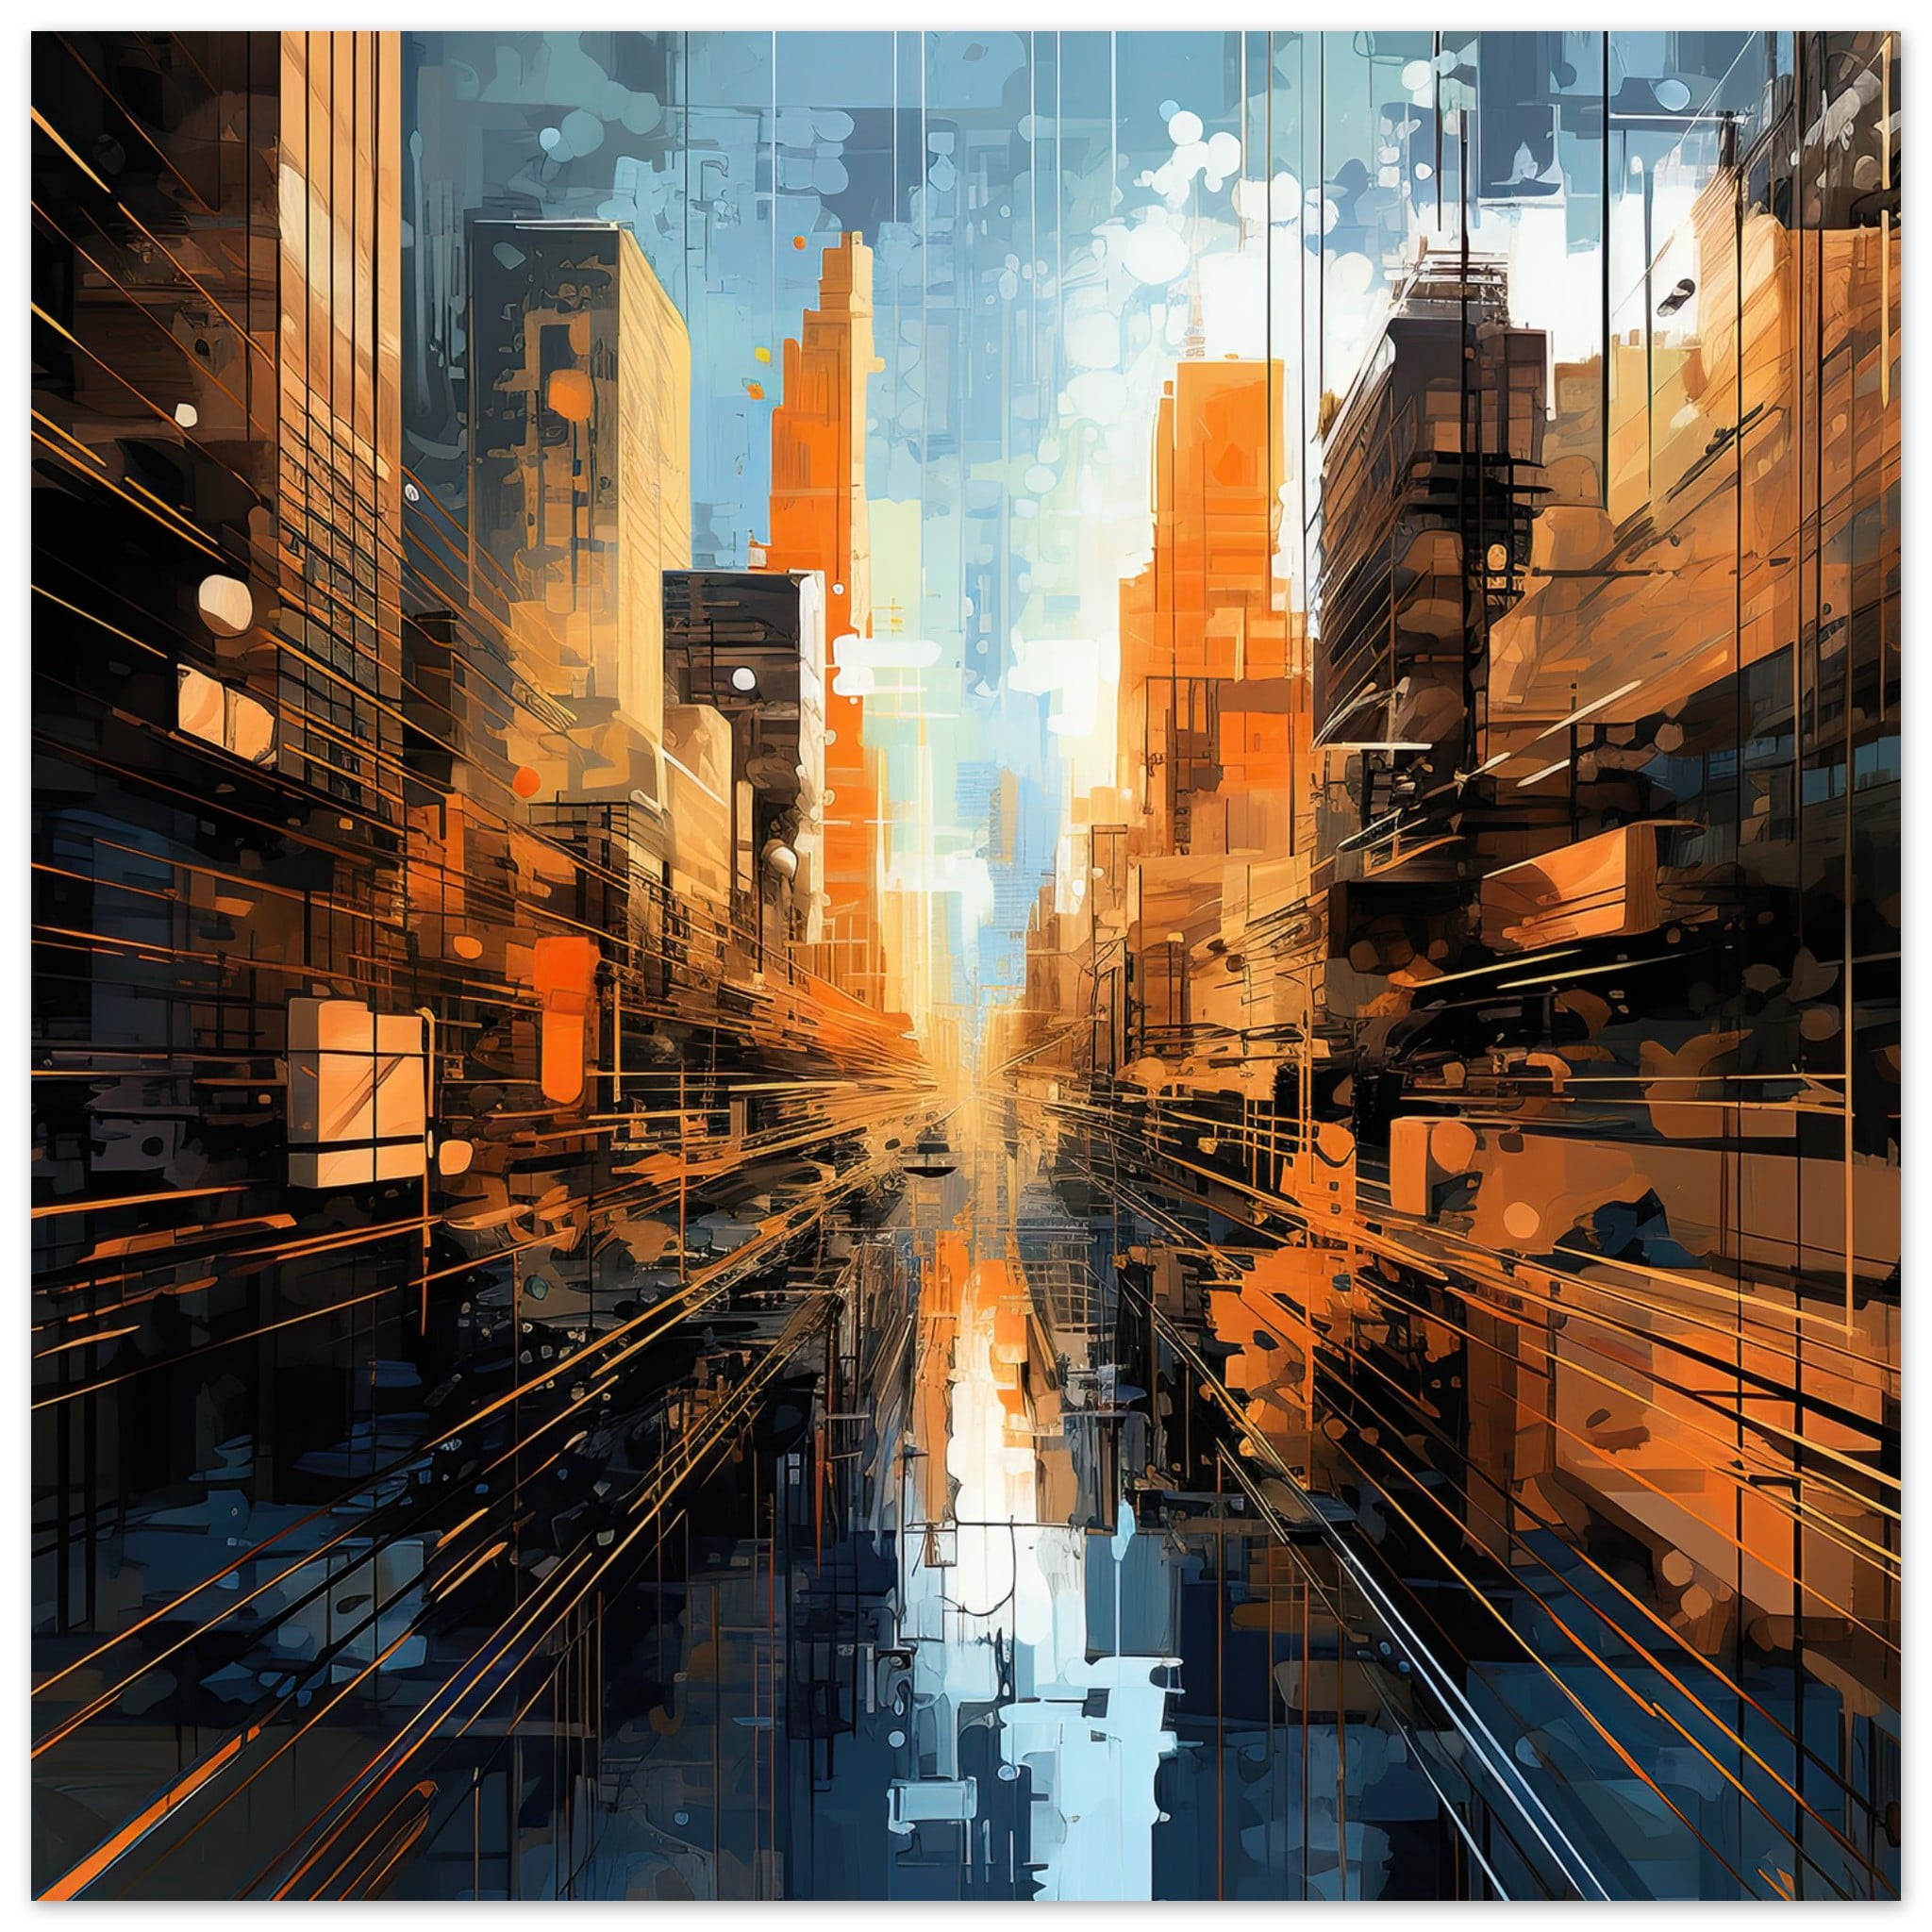 Abstract City Art Poster – 50×50 cm / 20×20″